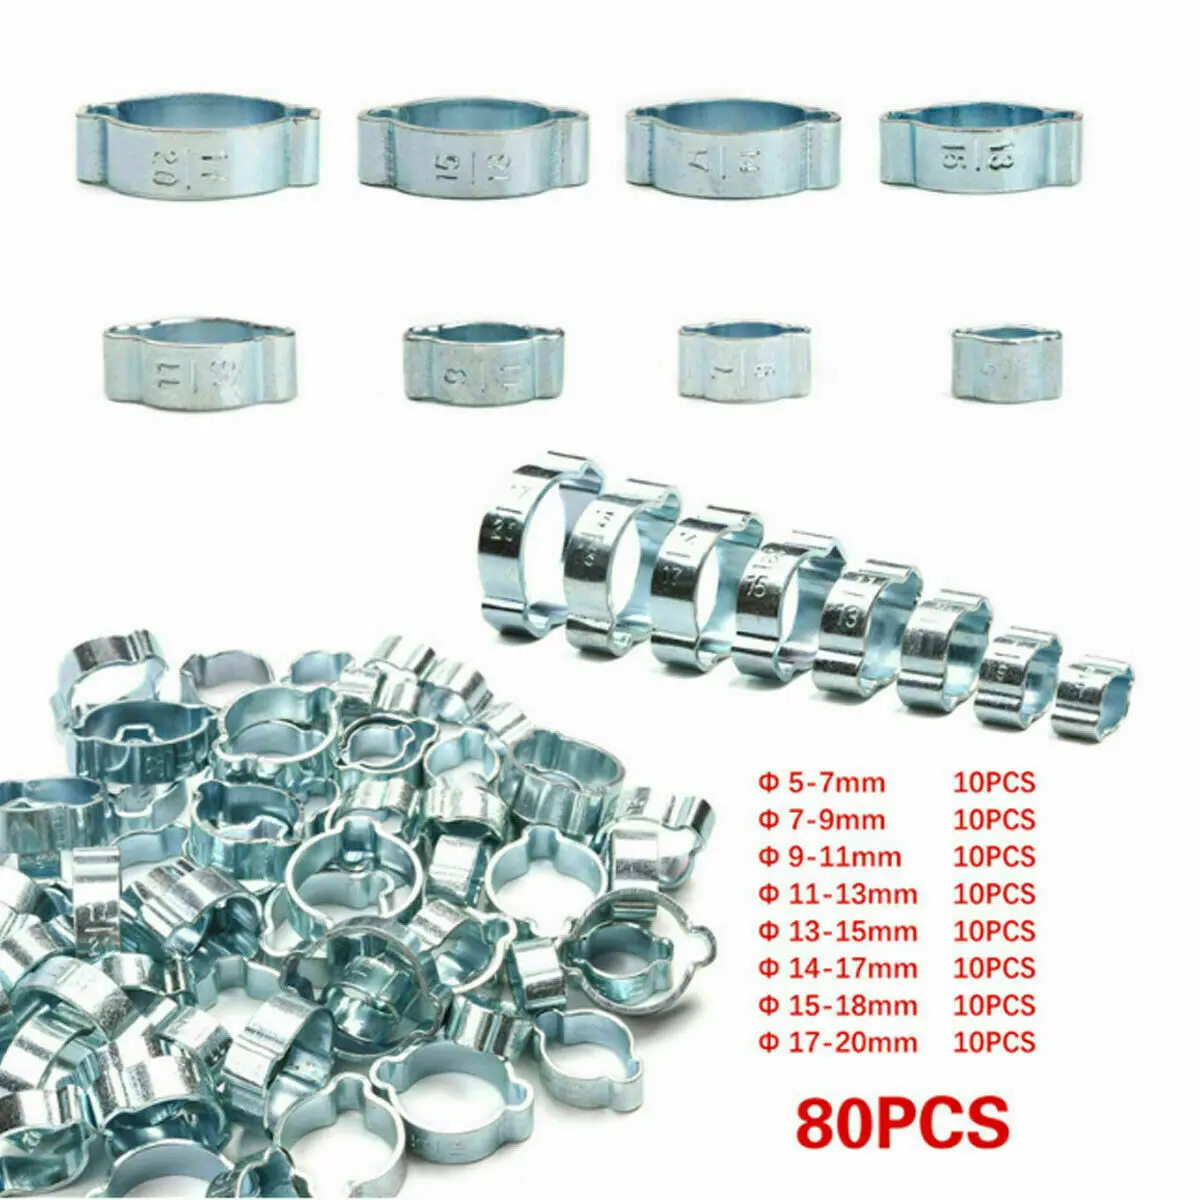 80PCS DOUBLE EAR CLAMP O CLIPS-Crimp Clip Air Silicone Petrol Water Fuel Hose Pipe Stainless Steel Hose Clamps Cinch Clamp Ring